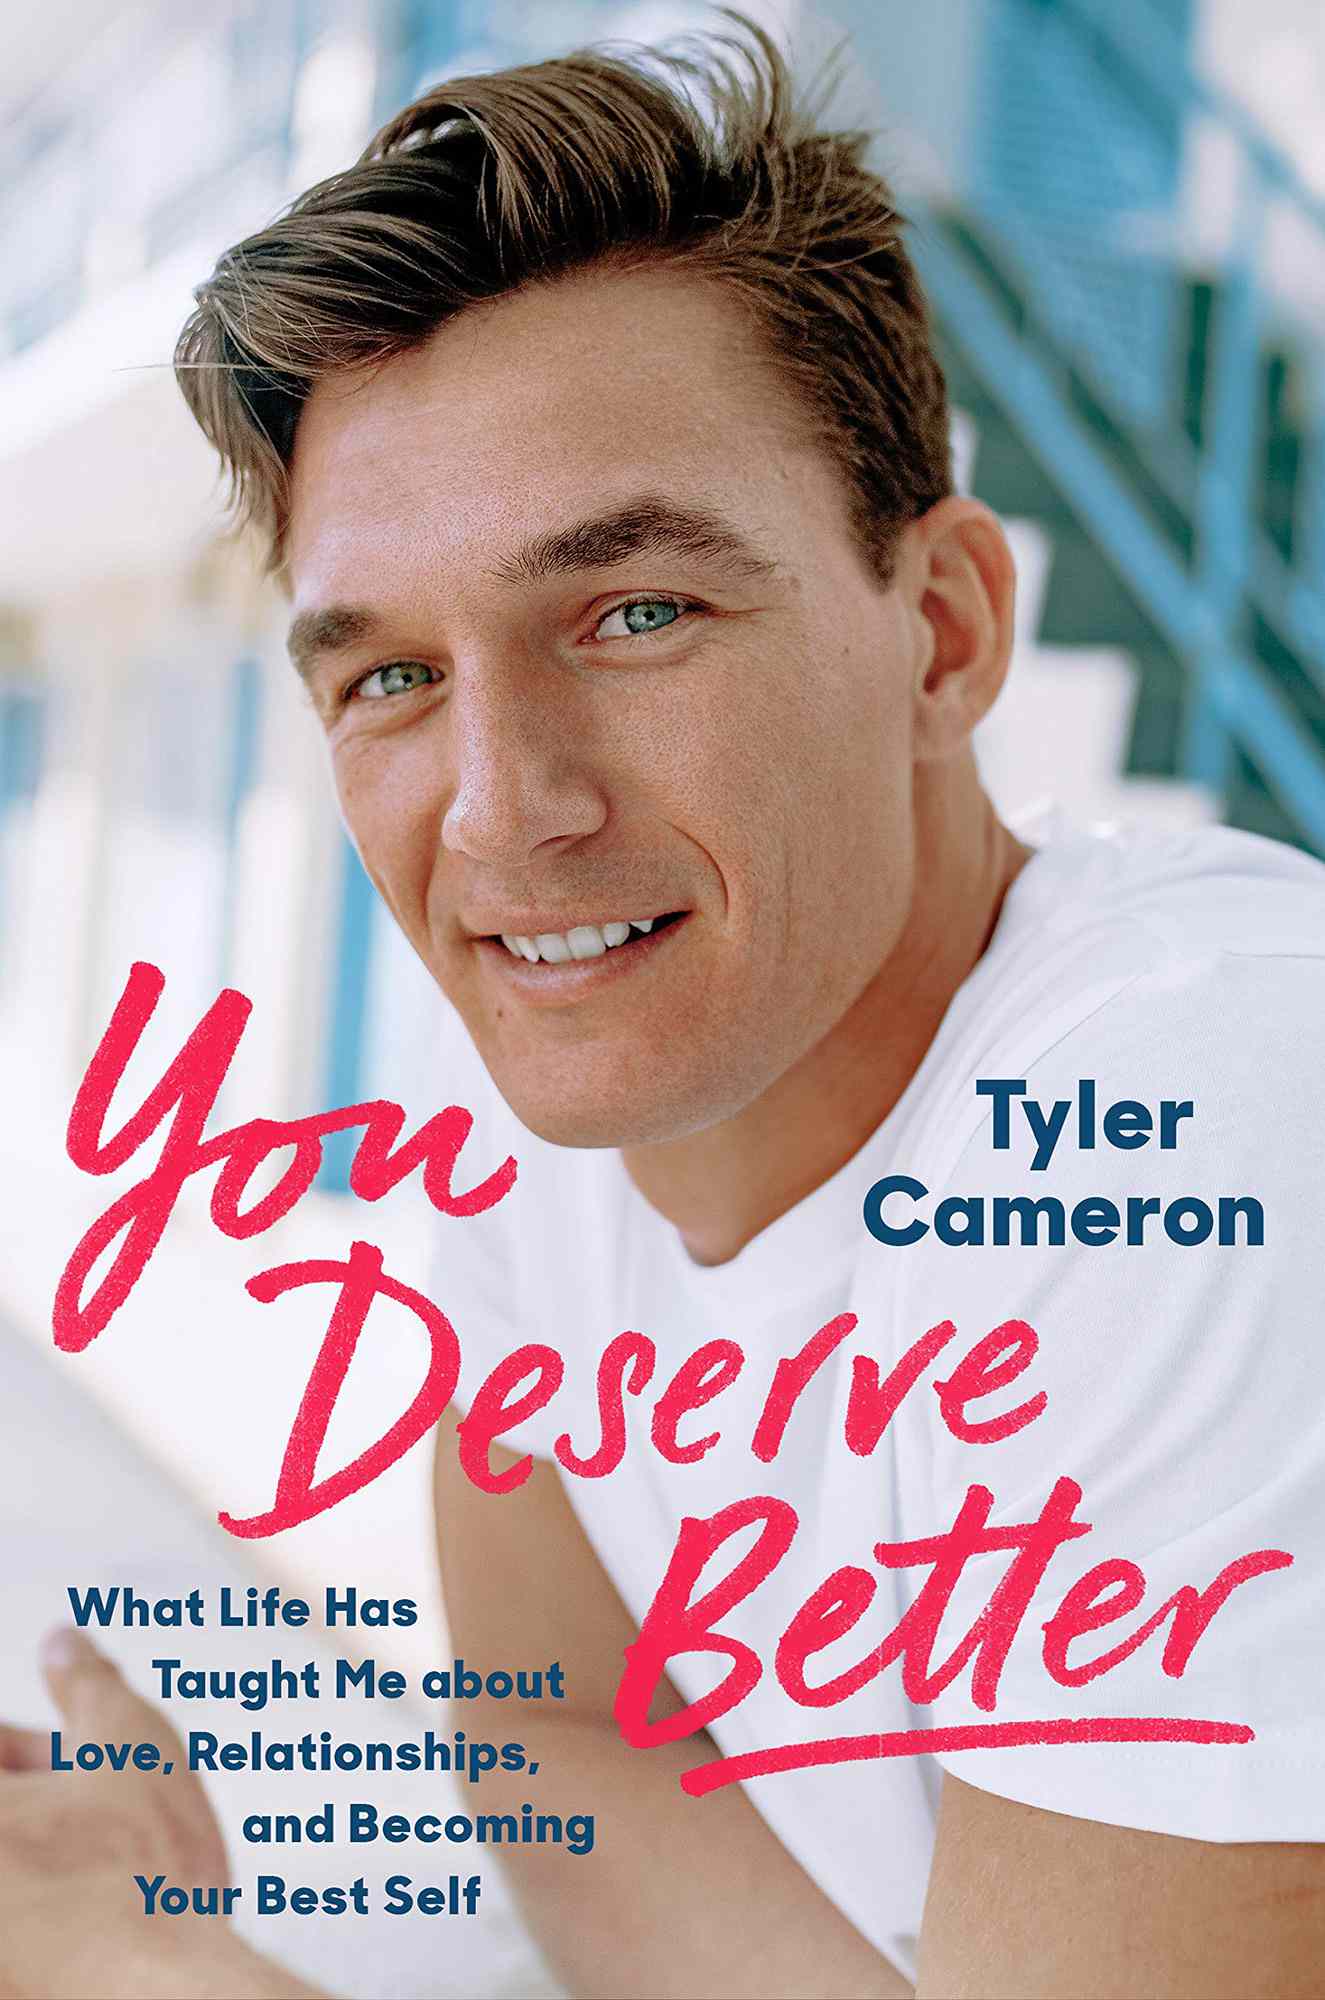 You Deserve Better: What Life Has Taught Me About Love, Relationships, and Becoming Your Best Self Hardcover – July 27, 2021 by Tyler Cameron (Author)